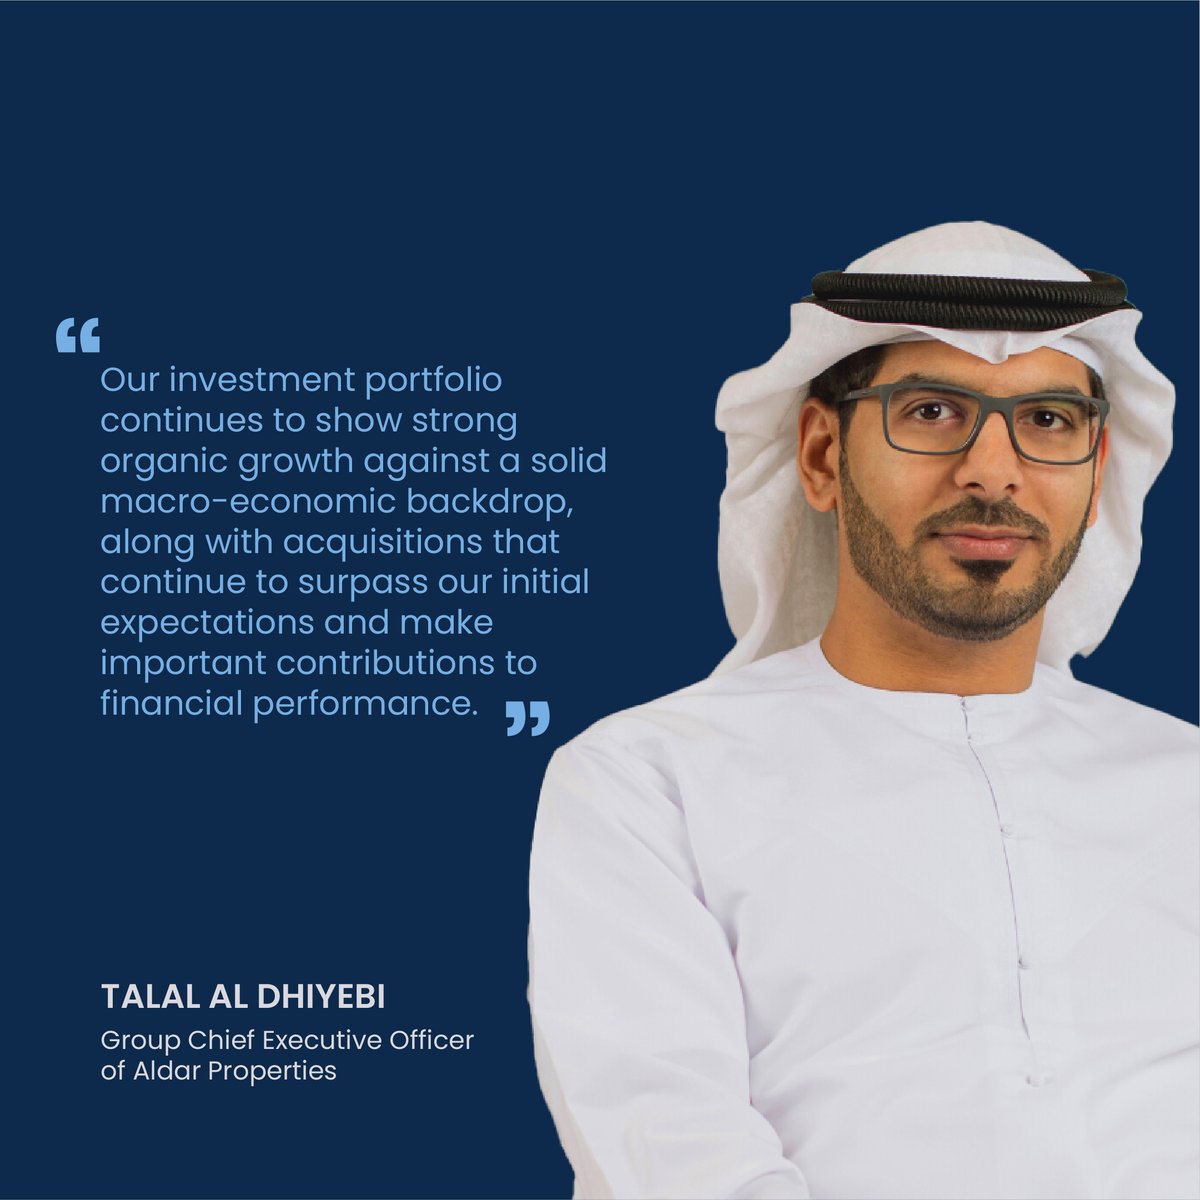 “Aldar continues to reach new levels with development driving strong growth this quarter reaching a new run rate through our record backlog that exceeds AED 38 billion.” TALAL AL DHIYEBI Group Chief Executive Officer of Aldar Properties